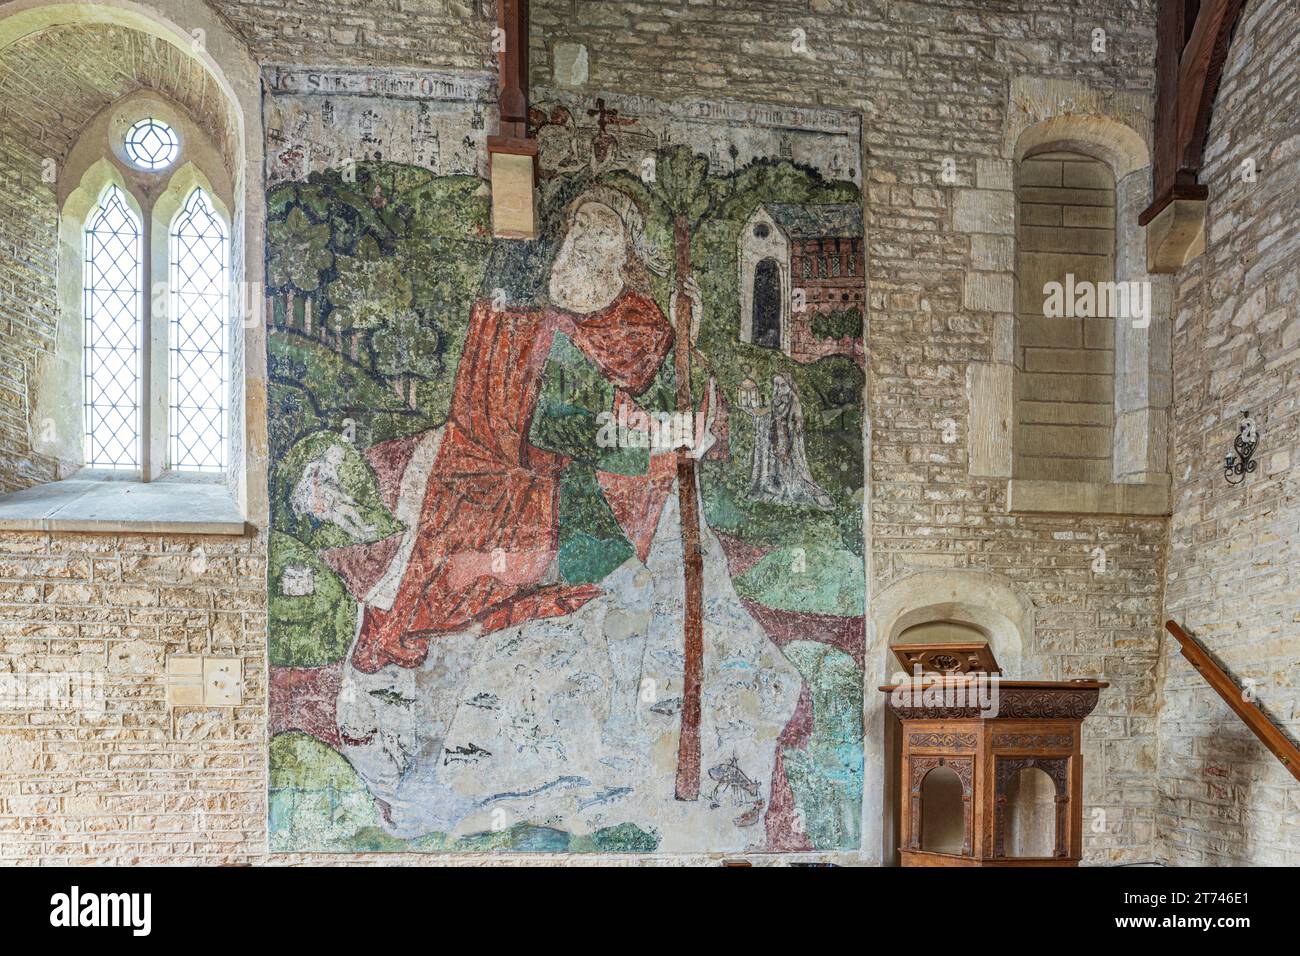 14th century wall painting of St Christopher in the 12th century church of St Mary Magdalene in the Cotswold village of Baunton, Gloucestershire UK Stock Photo